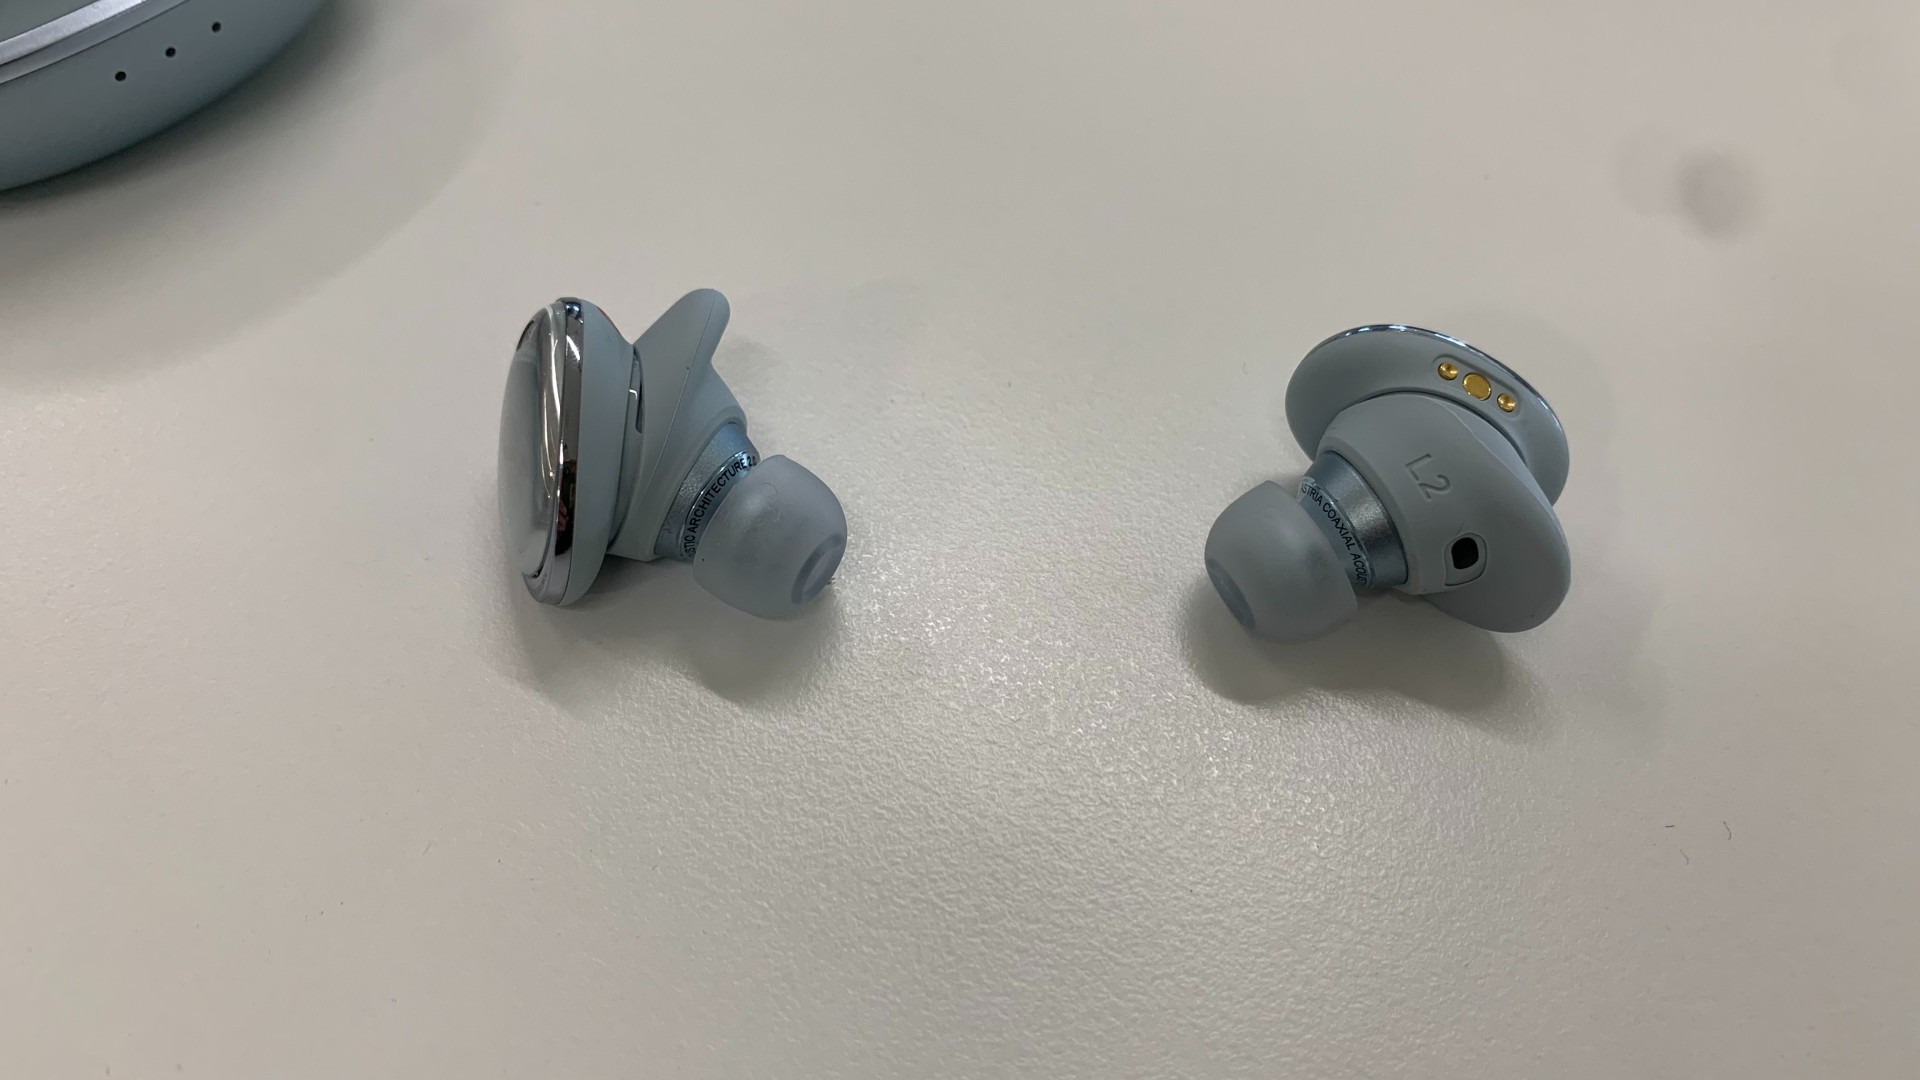 Close up image of Soundcore Liberty 3 Pro earbuds on their own with wings fitted